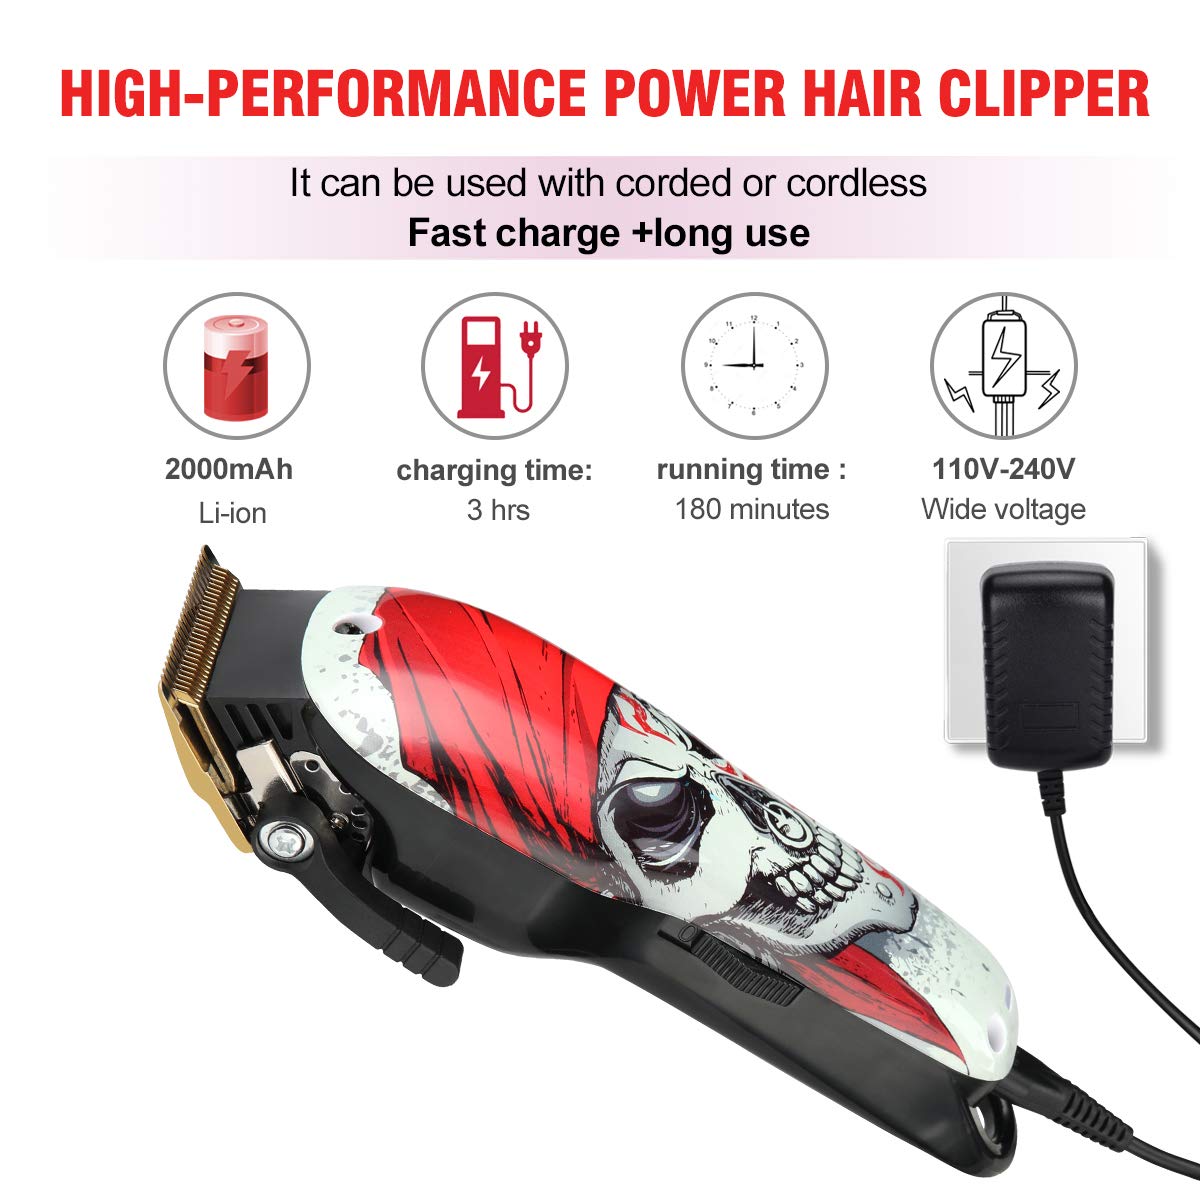 Cordless Hair Trimmer Cutting Kit With 8 Colorful Clipper Guards - 6 